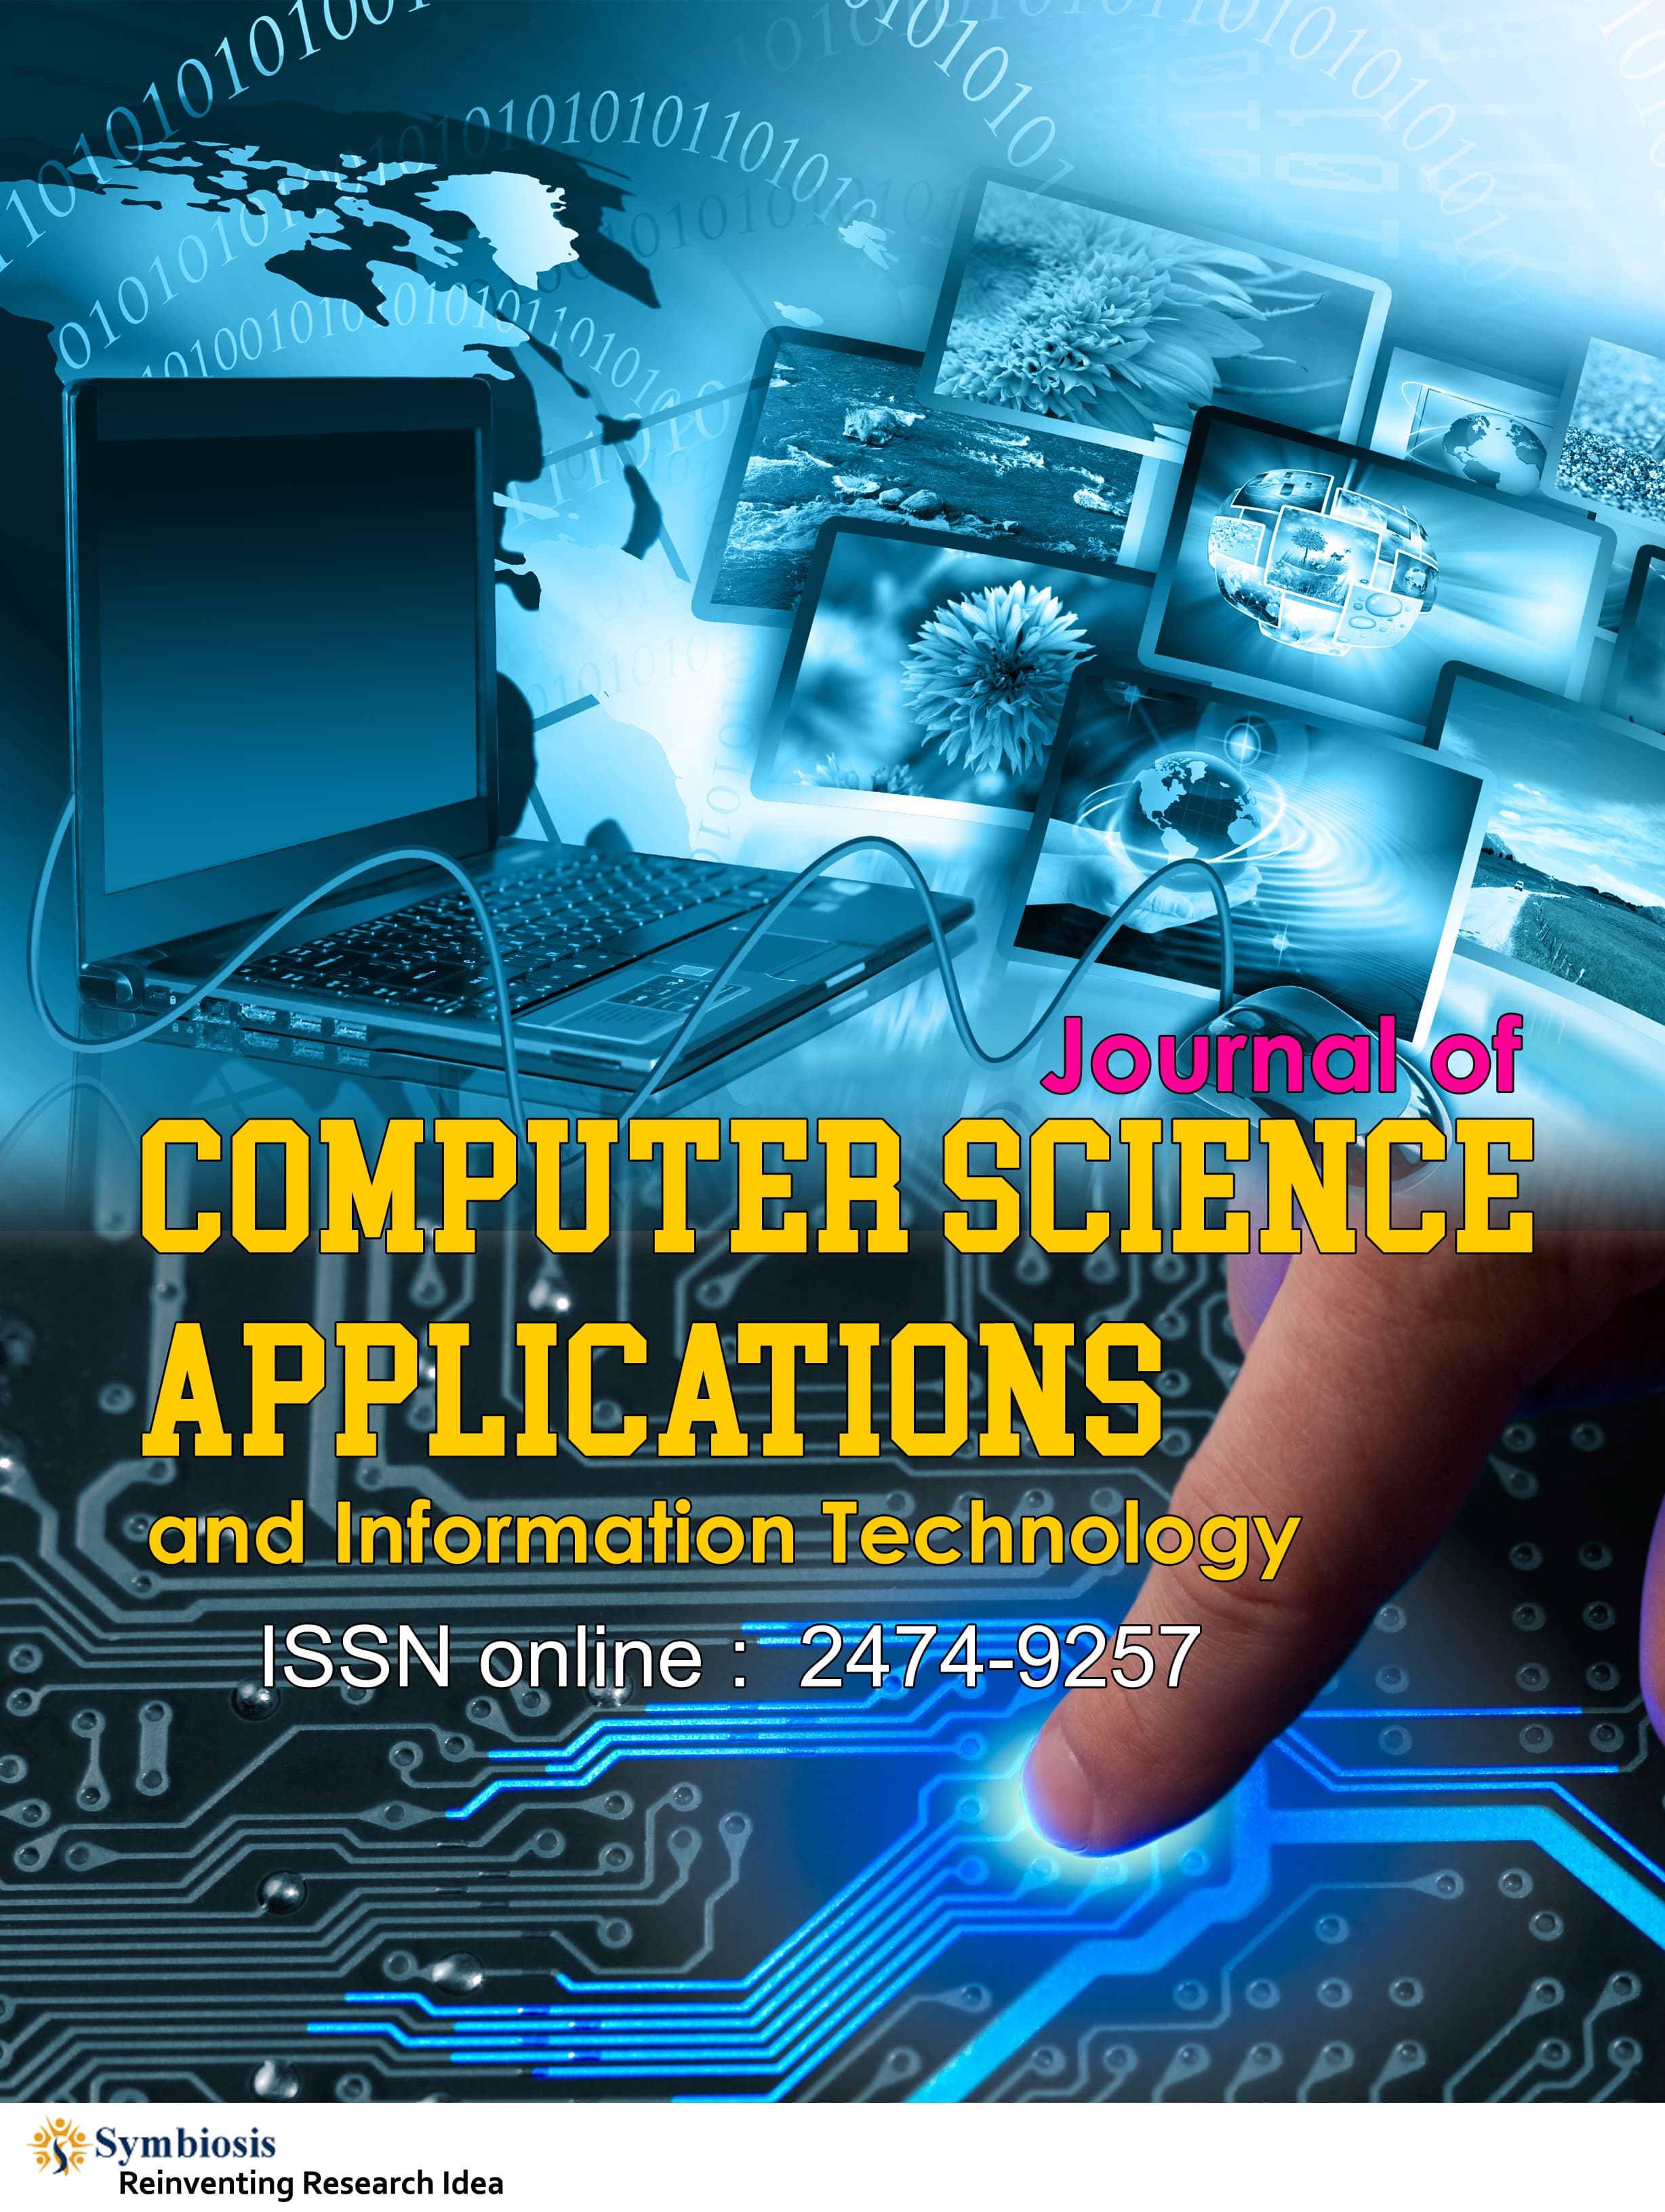 Journal of Computer Science and Applications